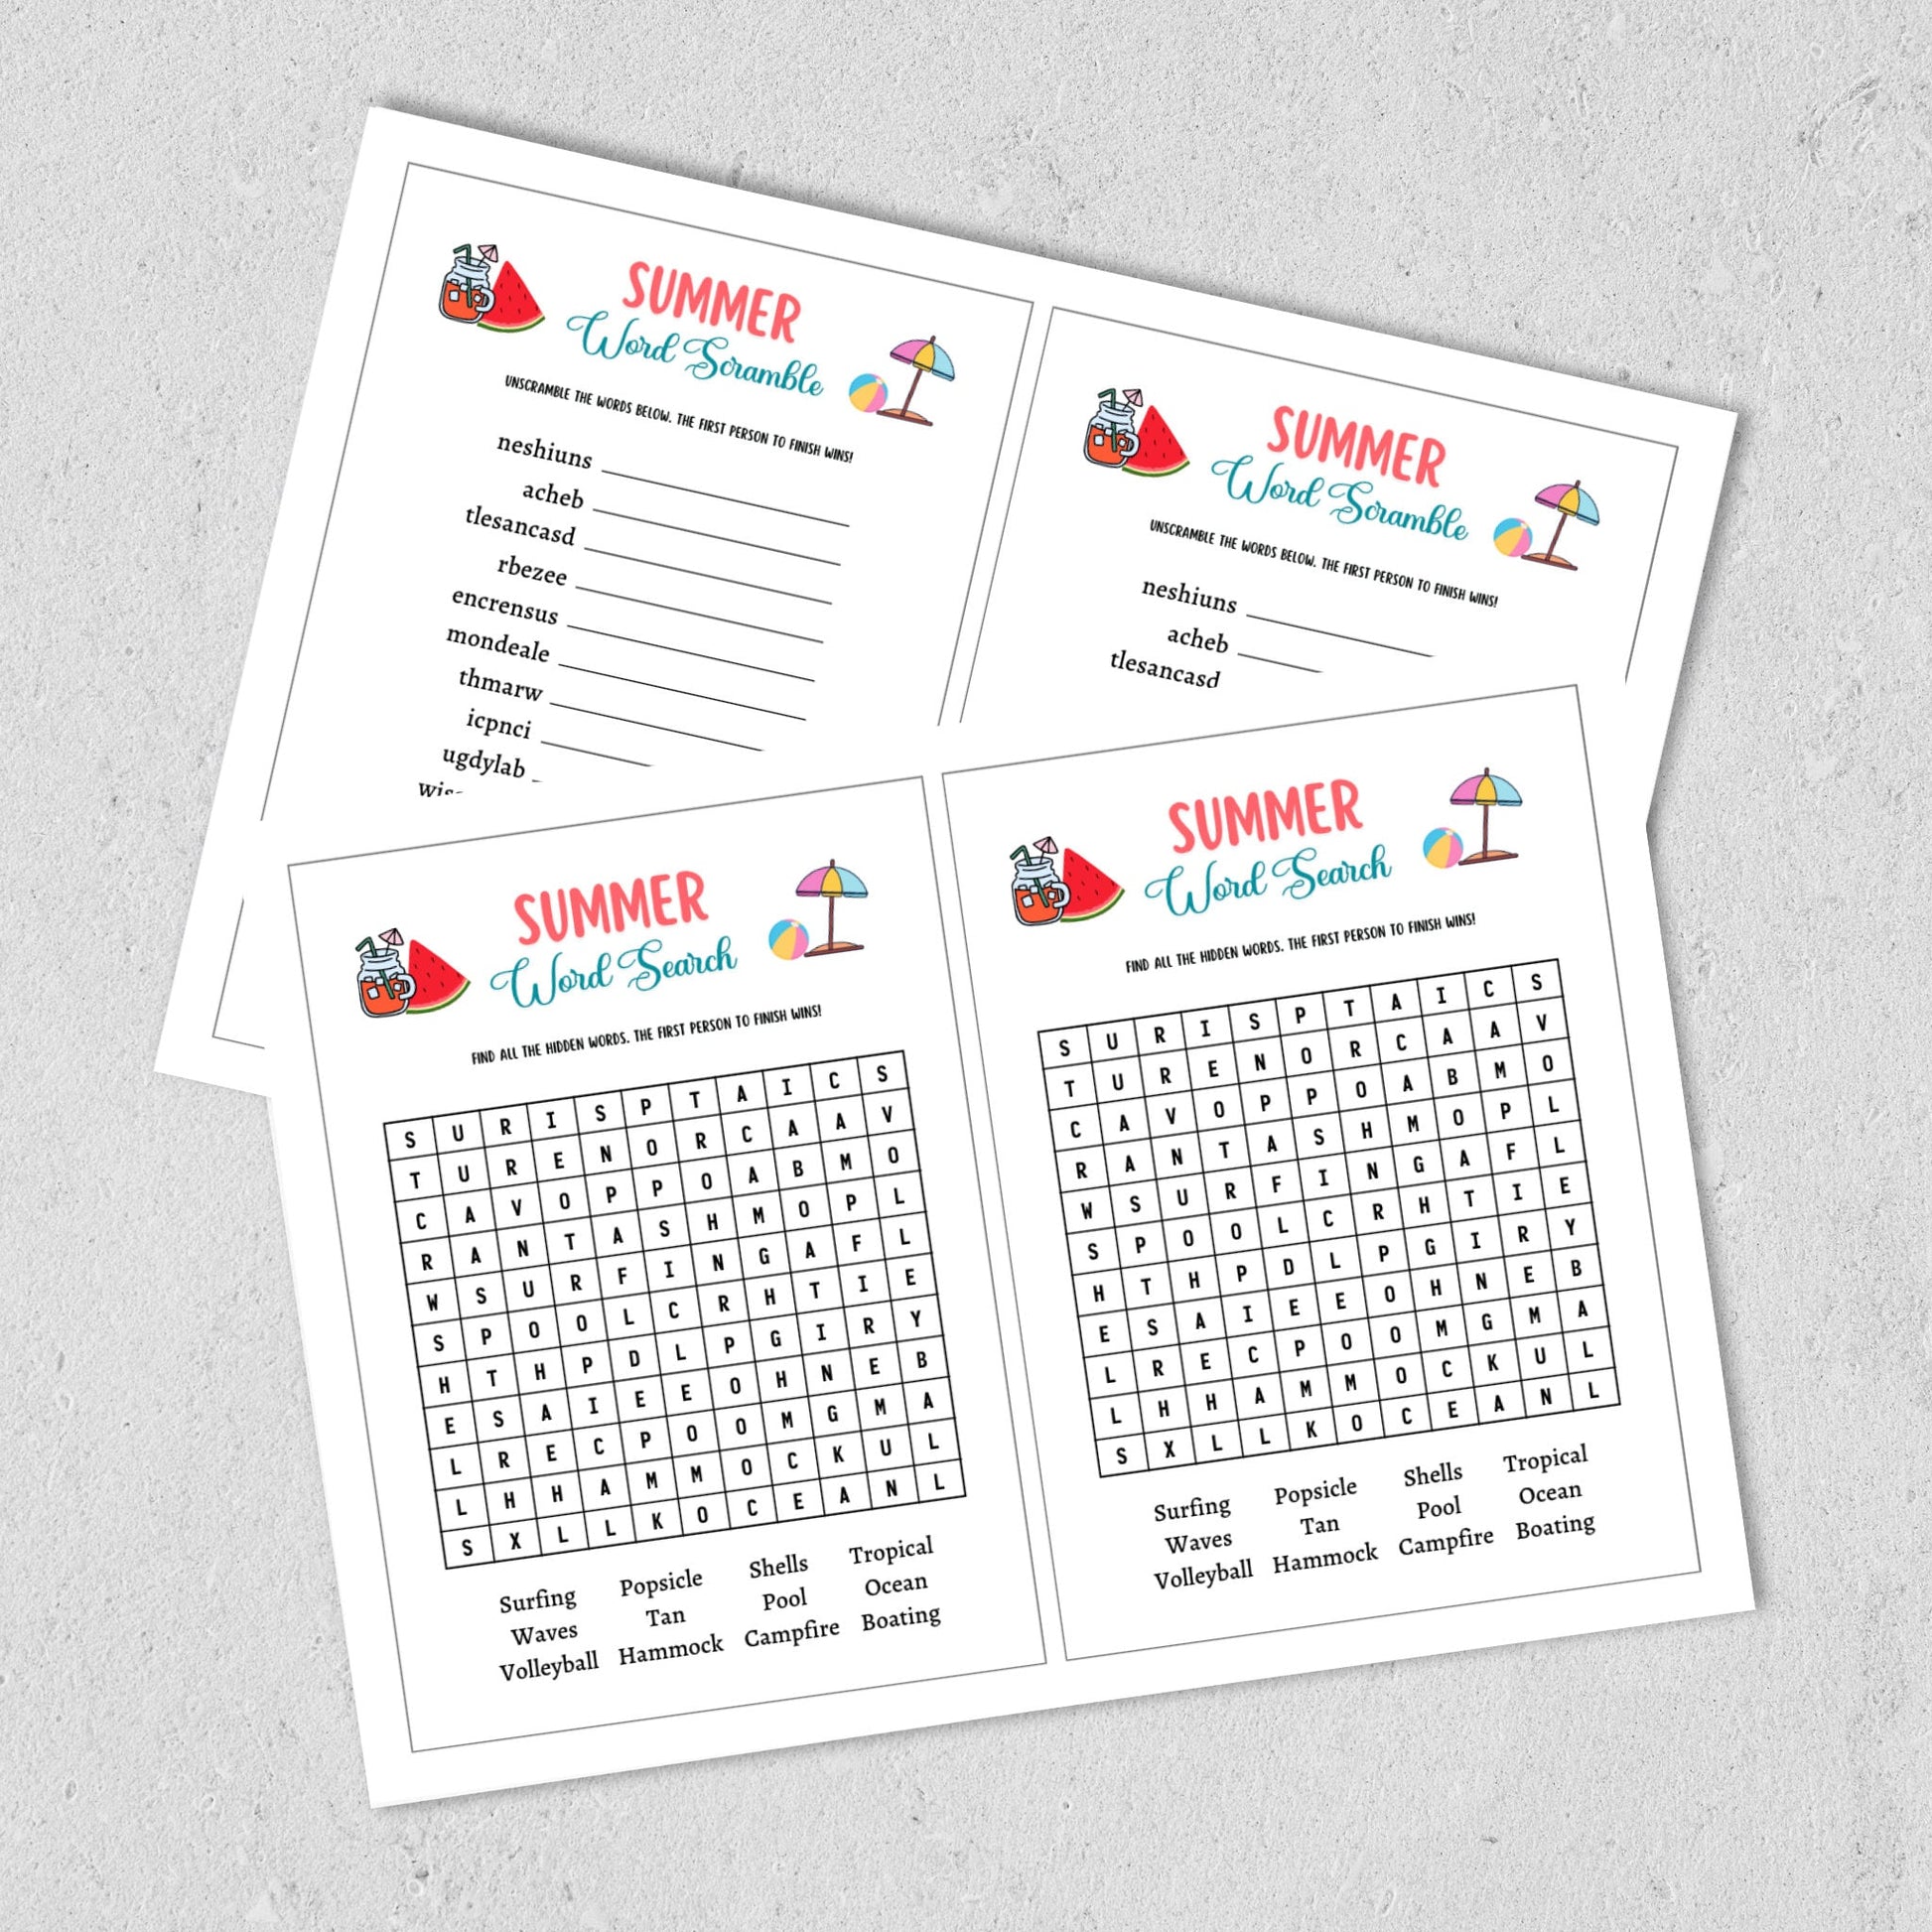 Summer Word Search Game Printable, Pool Party Games, Summer Camp Unscramble Activity, Fun Beach Games for Kids, Summer Break Vacation Ideas